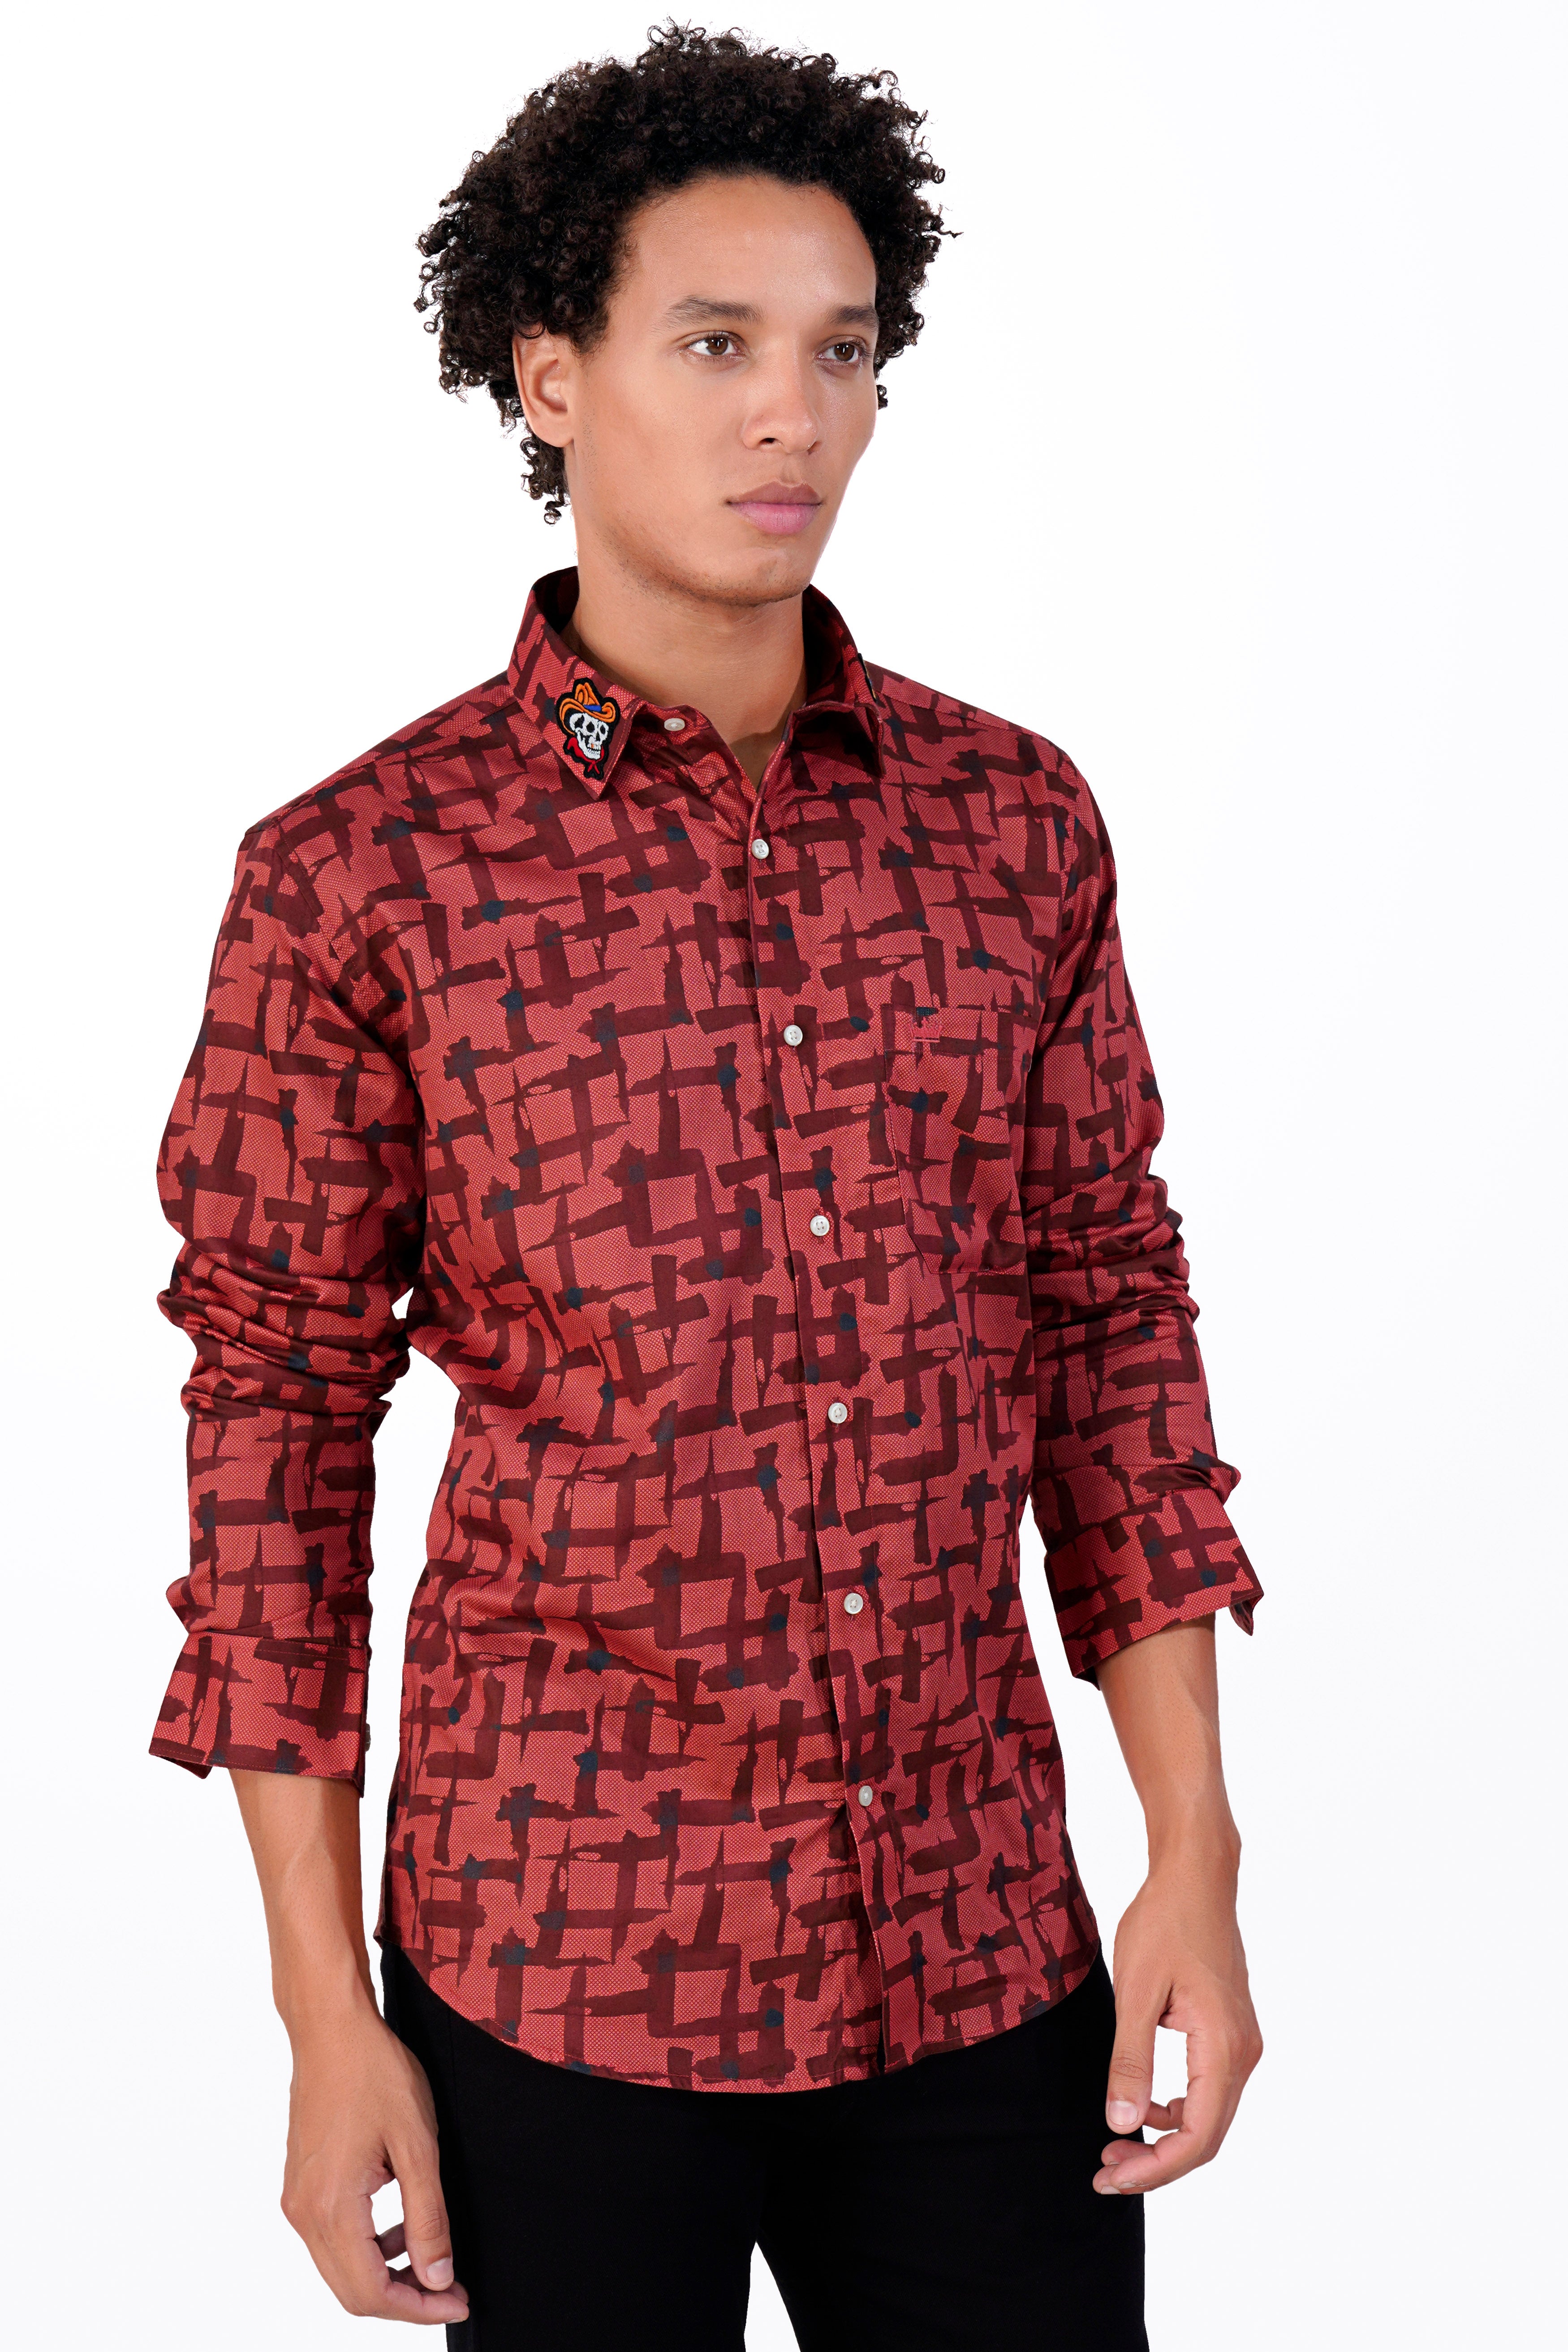 Cardinal Red Printed With Funky Patch Work Super Soft Premium Cotton Shirt 8190-E200-38, 8190-E200-H-38, 8190-E200-39, 8190-E200-H-39, 8190-E200-40, 8190-E200-H-40, 8190-E200-42, 8190-E200-H-42, 8190-E200-44, 8190-E200-H-44, 8190-E200-46, 8190-E200-H-46, 8190-E200-48, 8190-E200-H-48, 8190-E200-50, 8190-E200-H-50, 8190-E200-52, 8190-E200-H-52